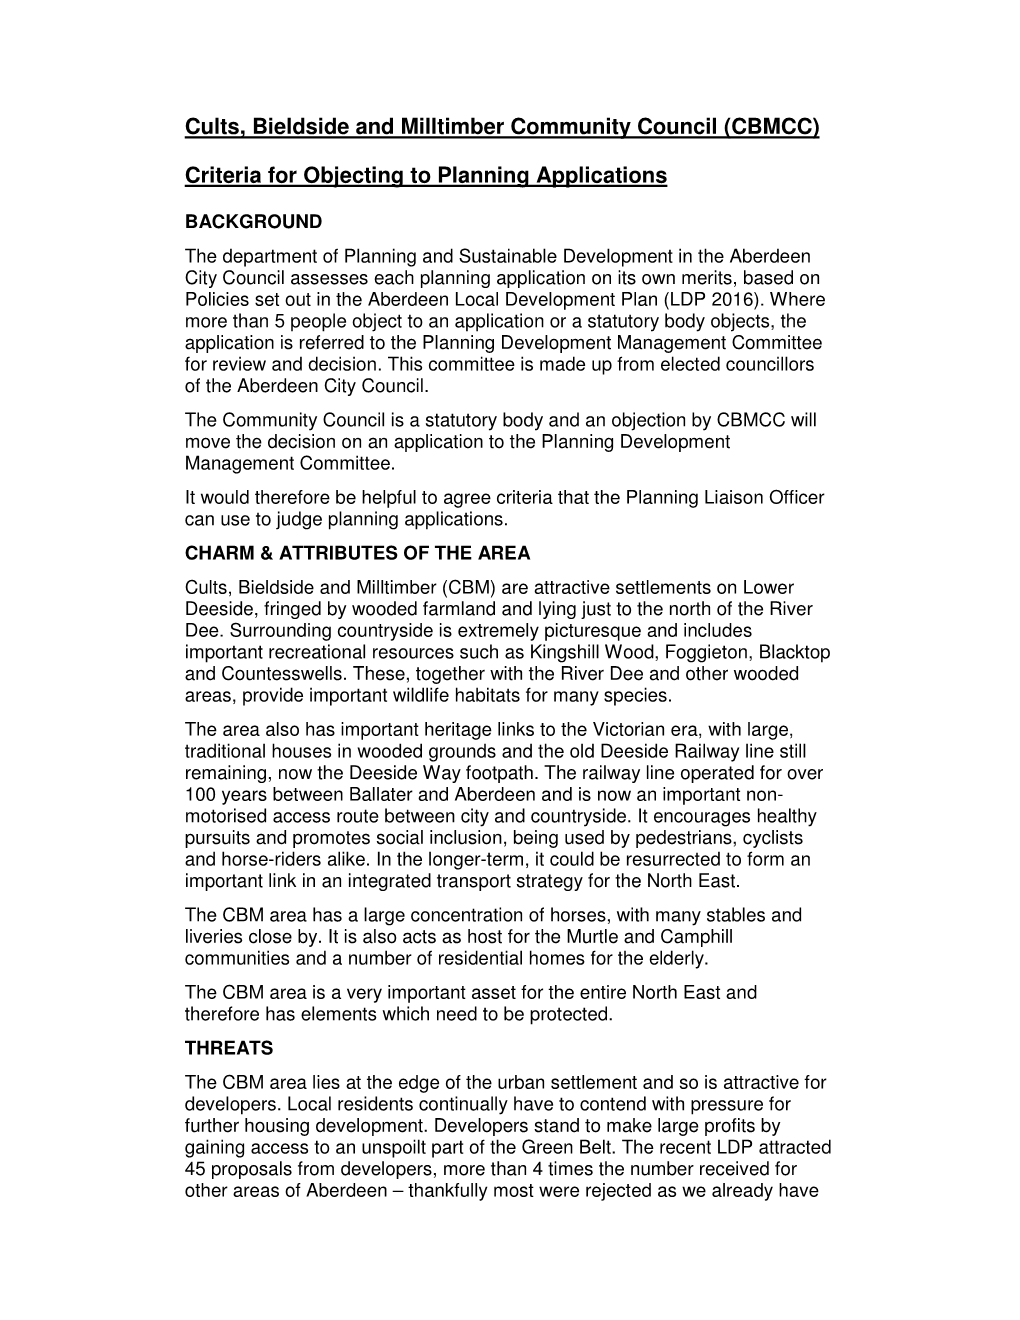 Criteria for Objecting to Planning Applications